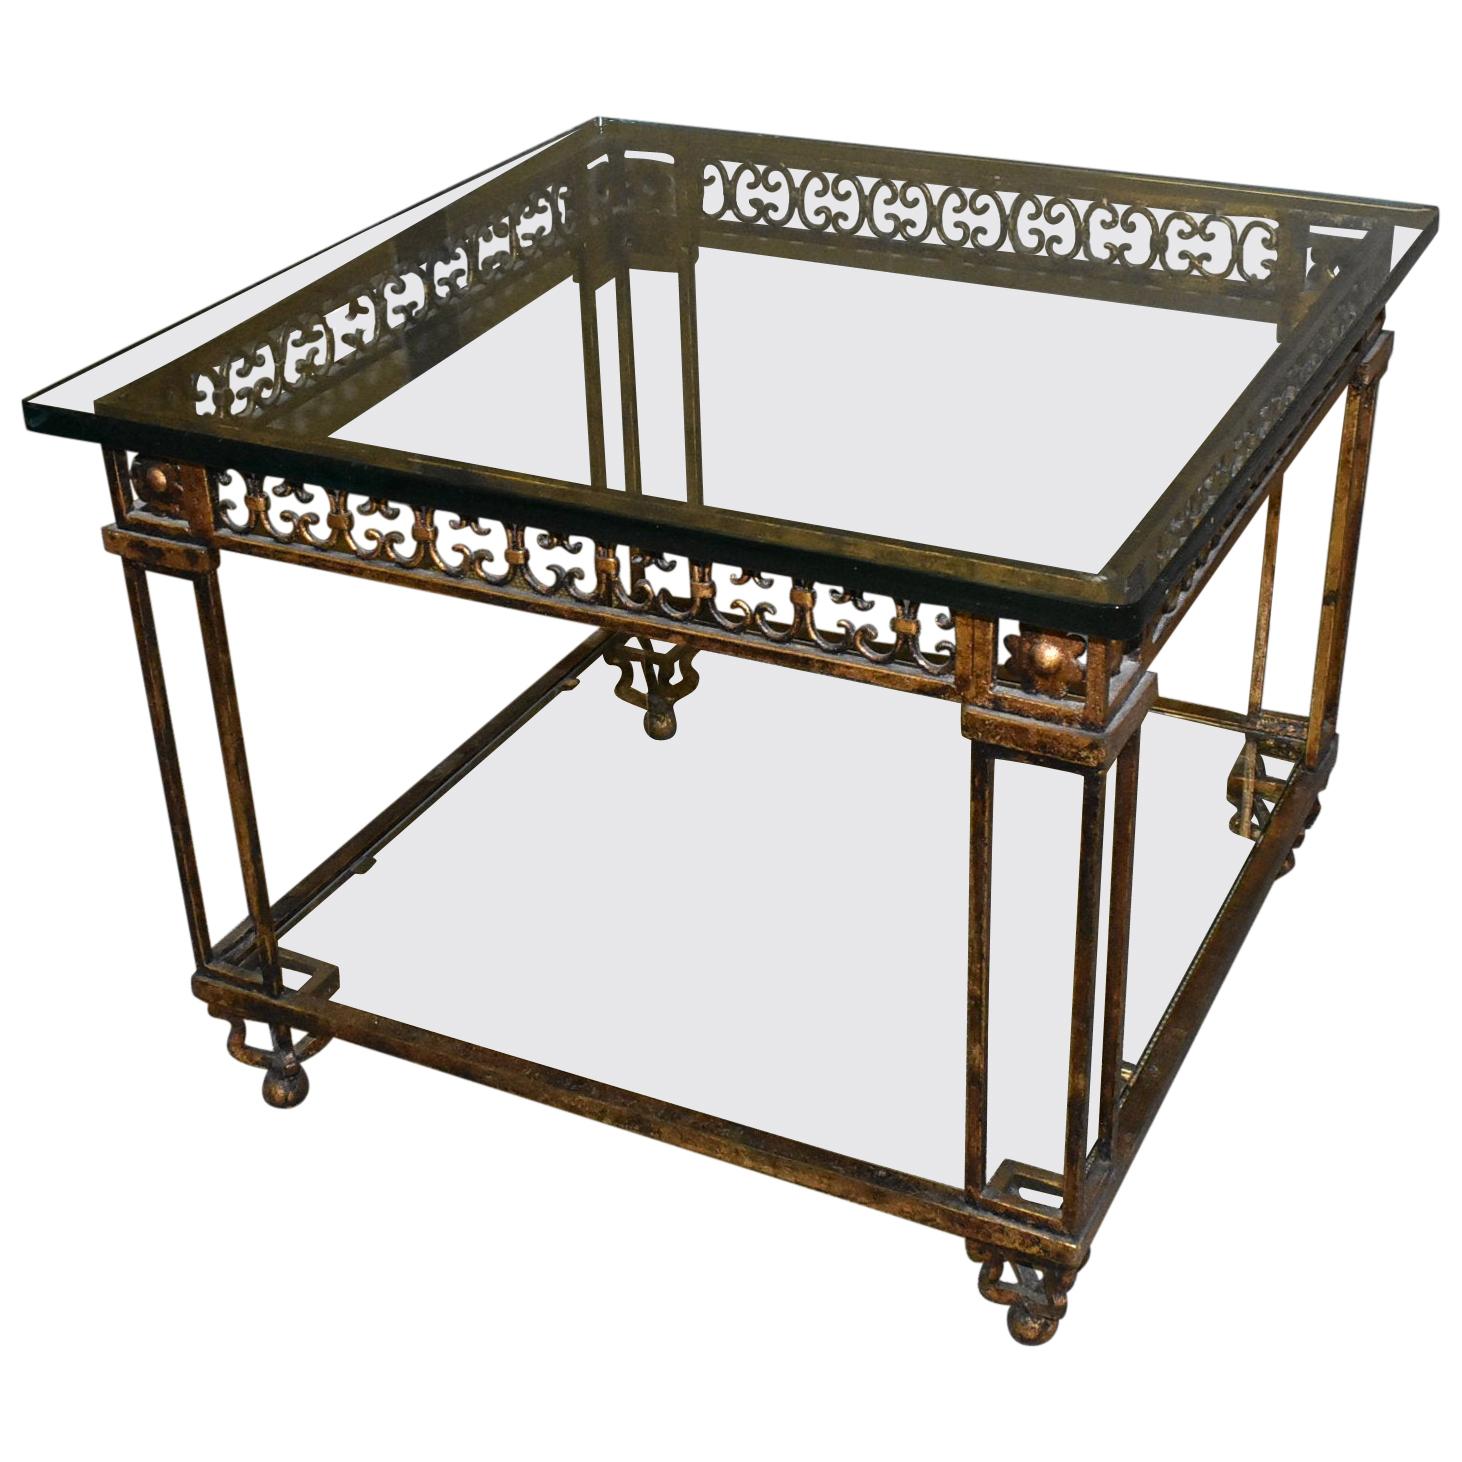 Iron and Glass Top Antique Gold Neoclassical Table with Bottom Shelf For Sale